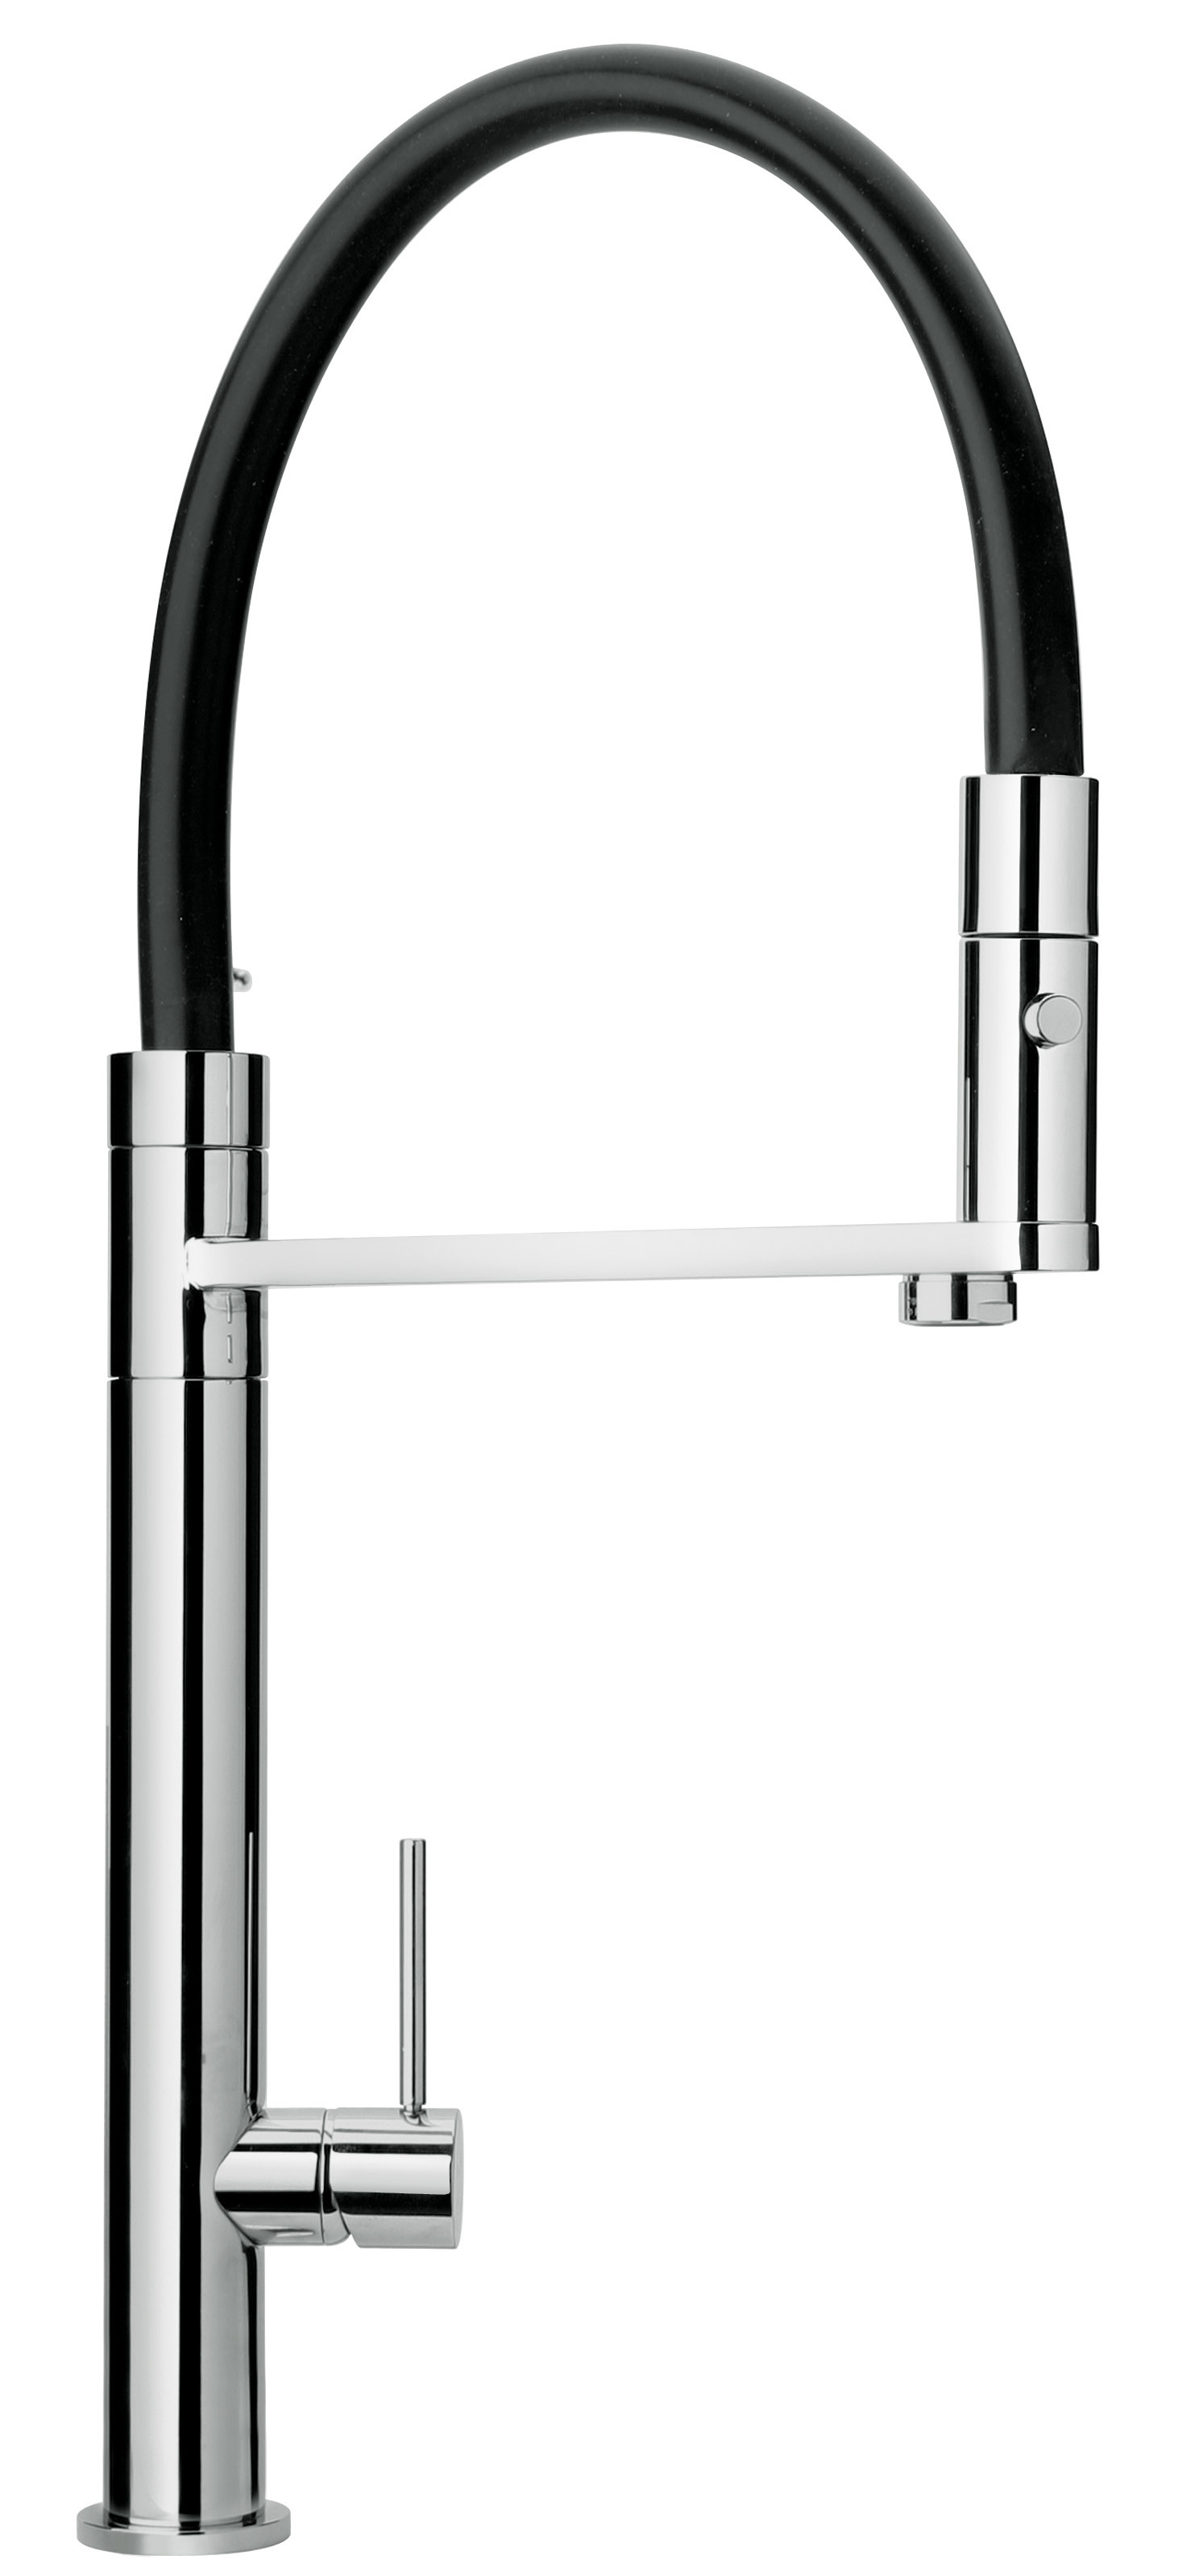 Latoscana 78CR559YOSS Elba Single Handle Pull-Out Spray Kitchen Faucet In Chrome